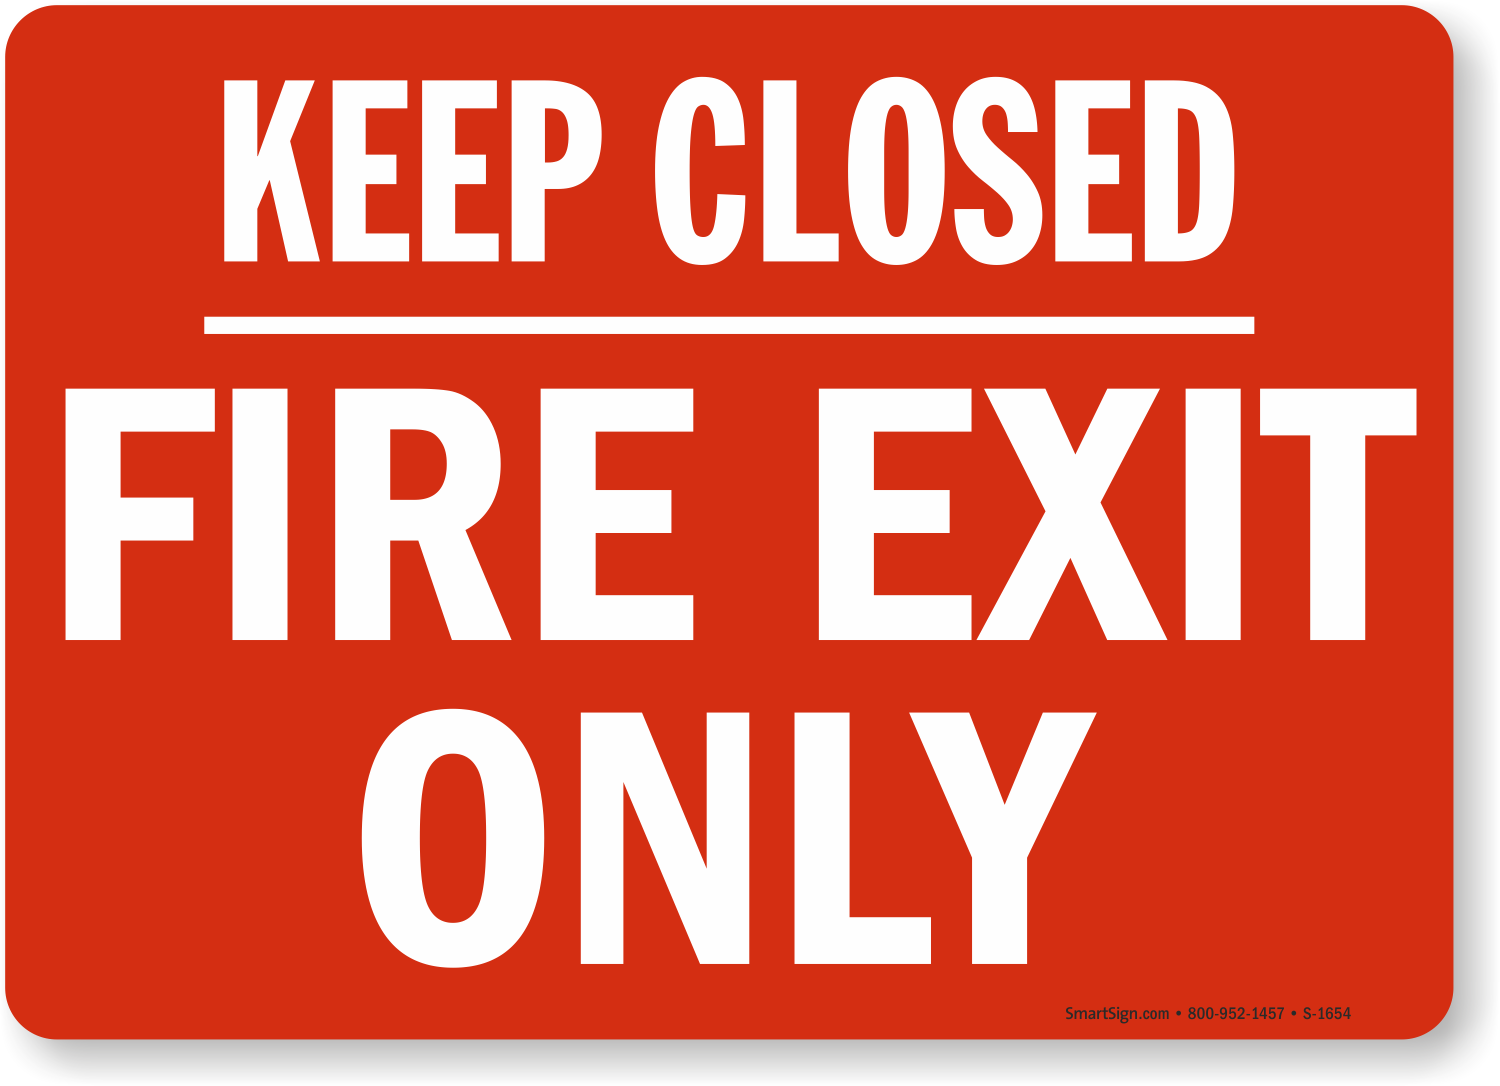 Plastic or Permanent Sticker Fire Exit sign 55 